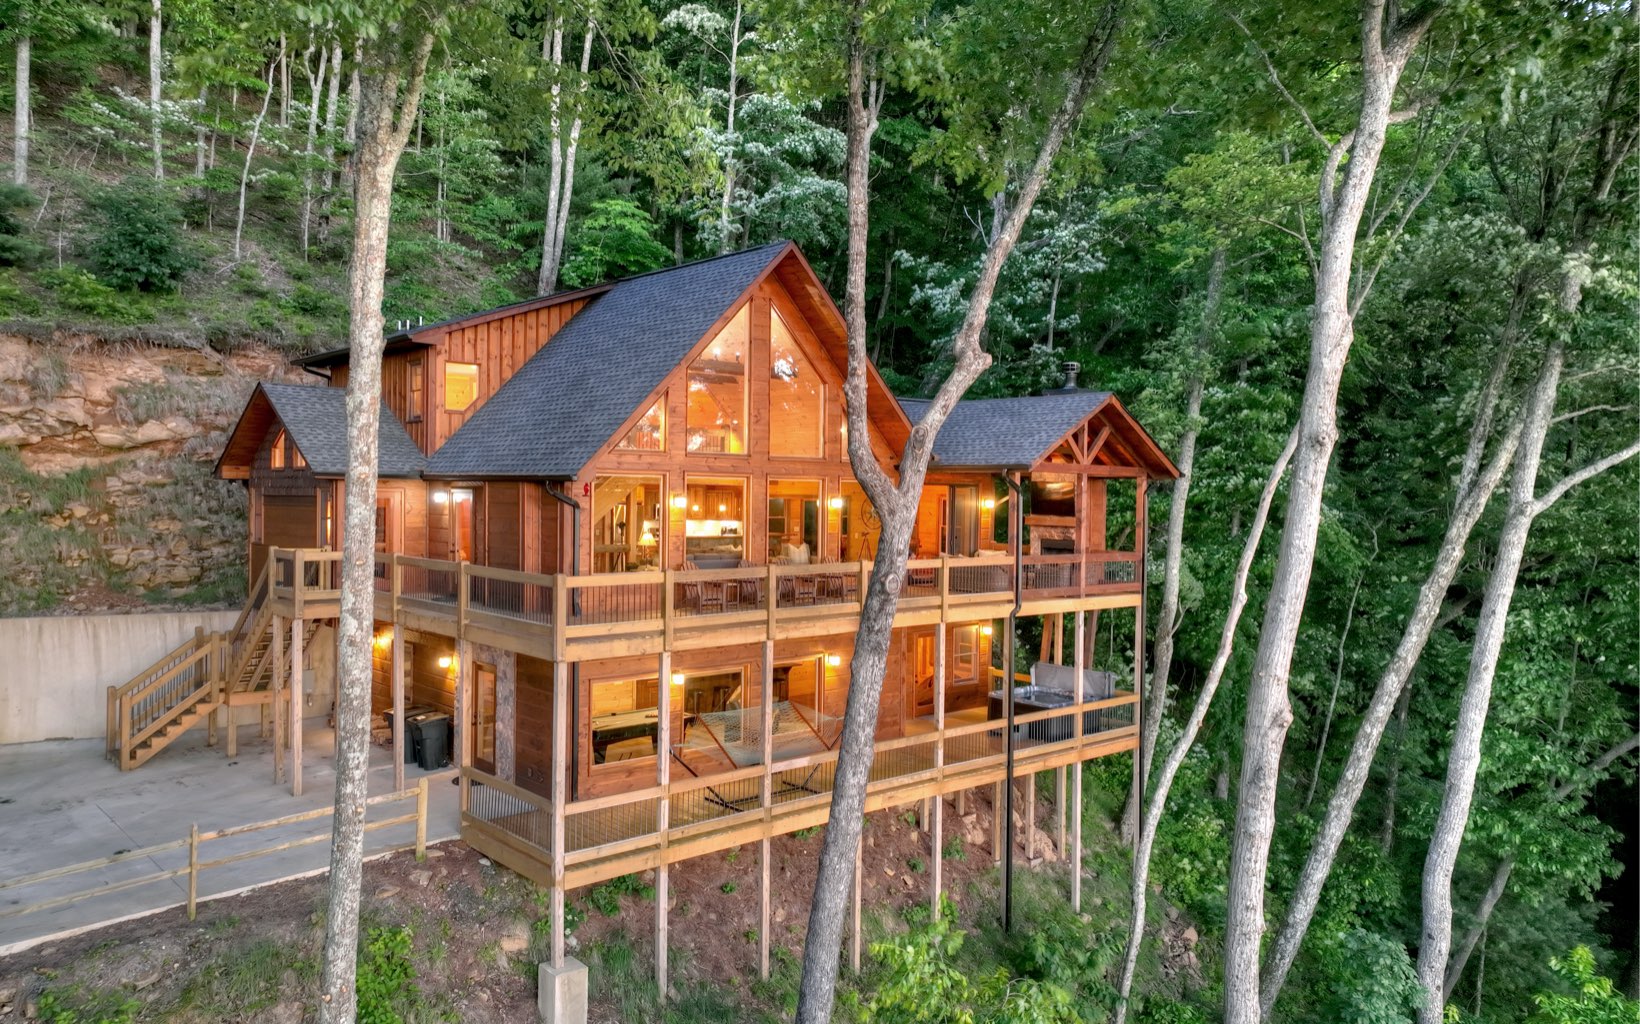 Privacy ,Views, USFS ,and Aska Adventure Area come together in this showstopper North GA cabin!!! This 4/3.5 features impeccable outdoor areas for entertaining with a stacked rock outdoor fireplace , wrap around decks, butcher block counter tops , gleaming wood floors, walls of windows to take in the layered Mountain View’s , chefs delight kitchen and much more . Add in the fact that this established rental comes fully furnished and you have a home run in your cabin wish list . This home leaves nothing to be desired and quality workmanship with every upgrade. The saying says you never know how many friends you have until you have a cabin and owning this successful rental cabin in the North GA Mtns where Lake Blue Ridge, Benton Mackaye hiking trails, Aska Adventure Area, numerous wineries , Blue Ridge Scenic Railway , Merciers famous fried pies, and the Toccoa River will def have you on top of everyone’s bbq invite list.